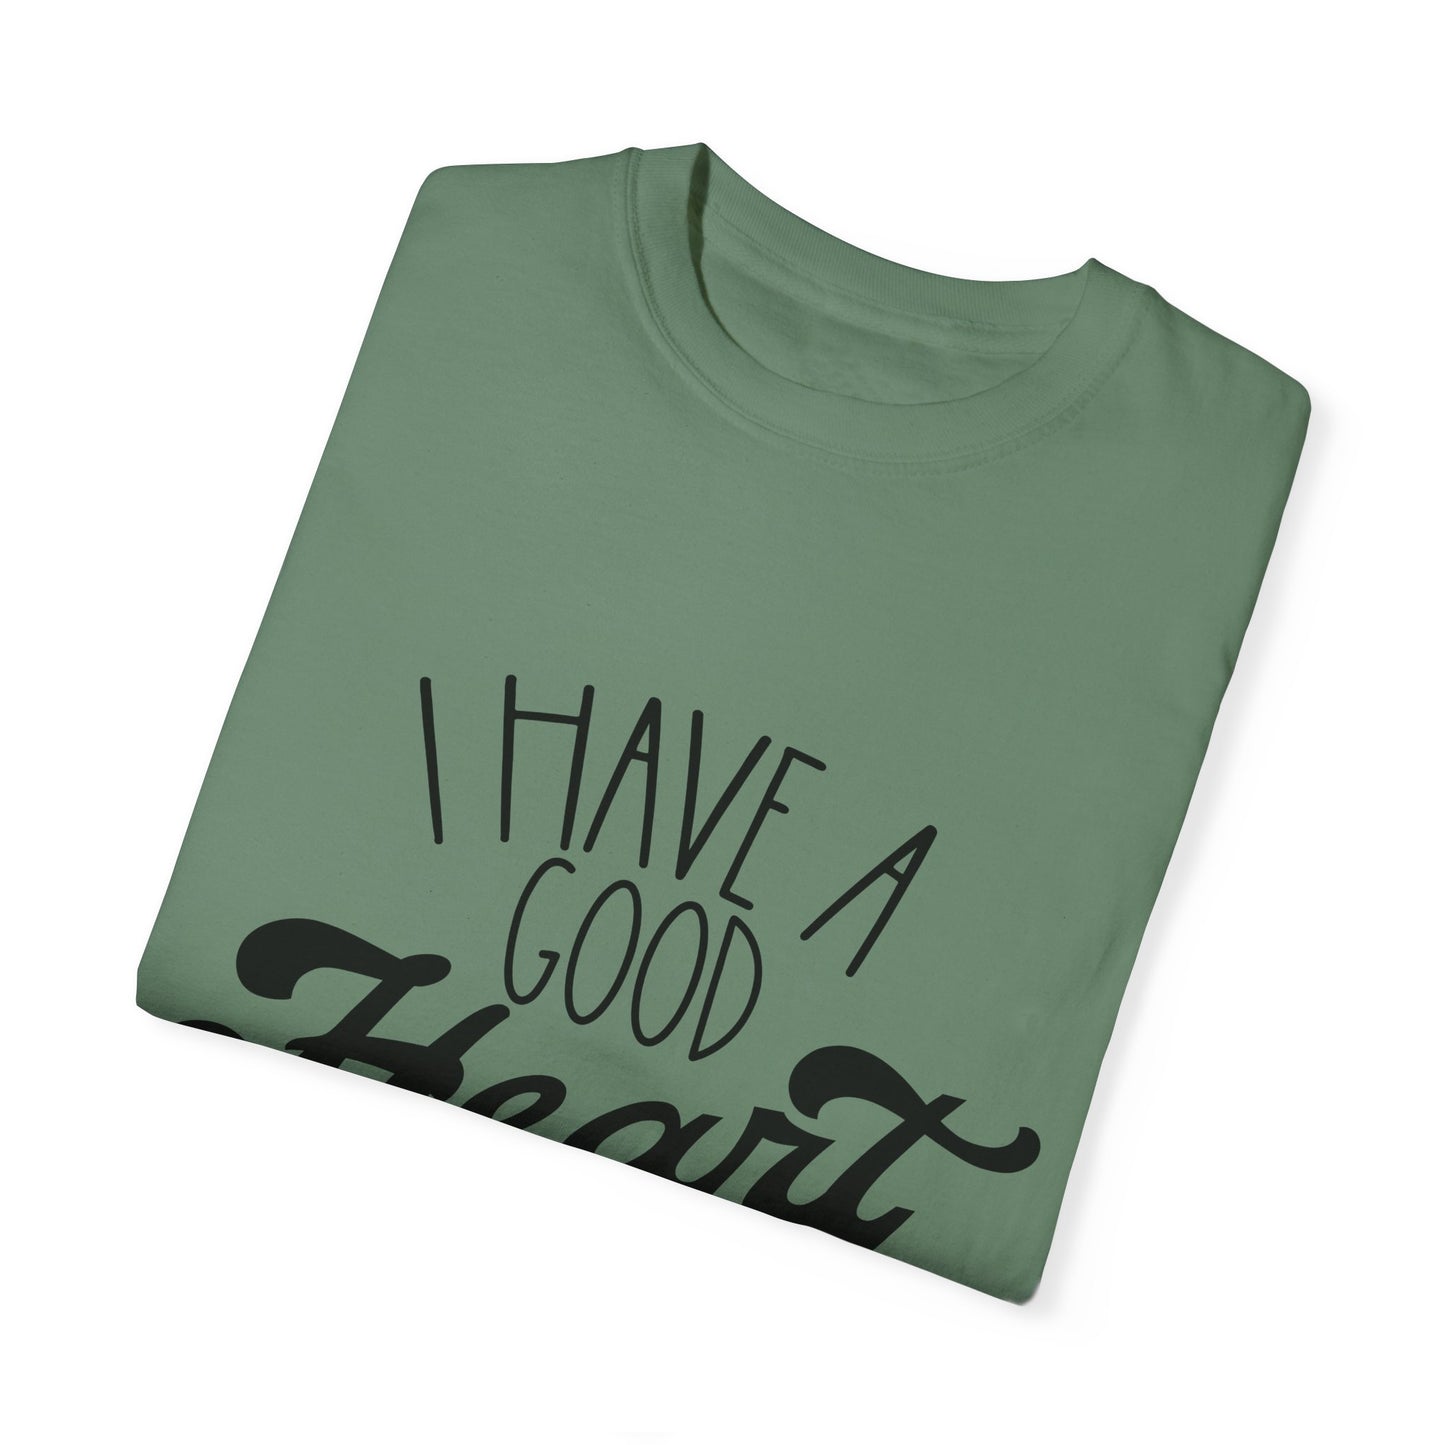 I have a good heart - Unisex Garment-Dyed T-shirt